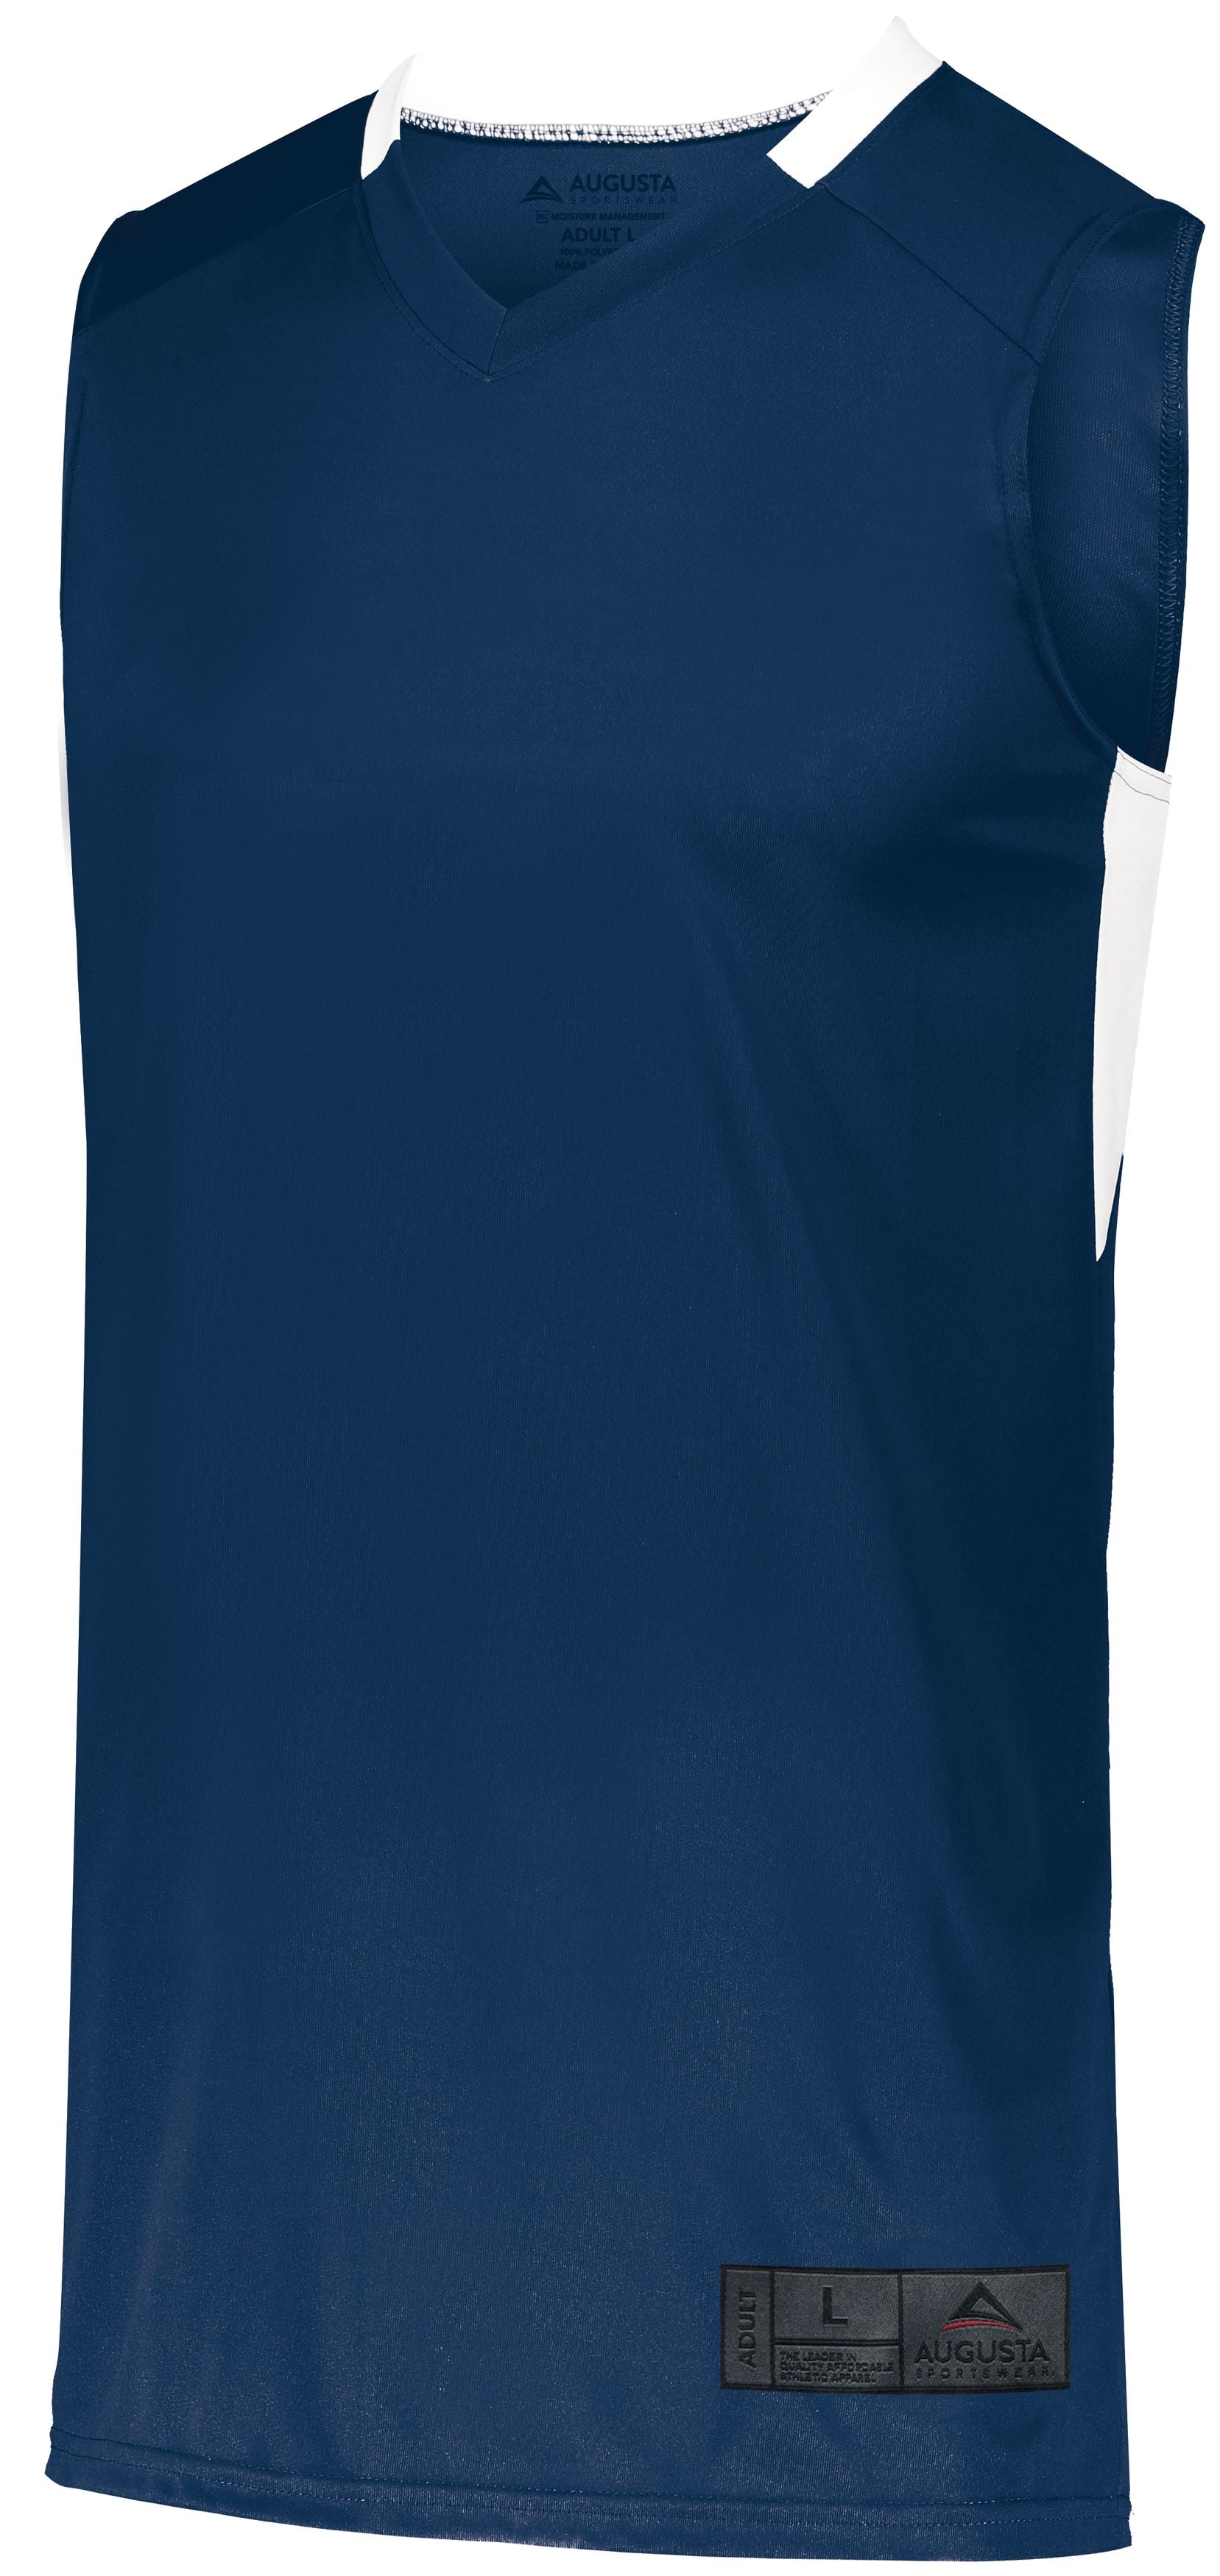 Augusta Sportswear Step-Back Basketball Jersey in Navy/White  -Part of the Adult, Adult-Jersey, Augusta-Products, Basketball, Shirts, All-Sports, All-Sports-1 product lines at KanaleyCreations.com